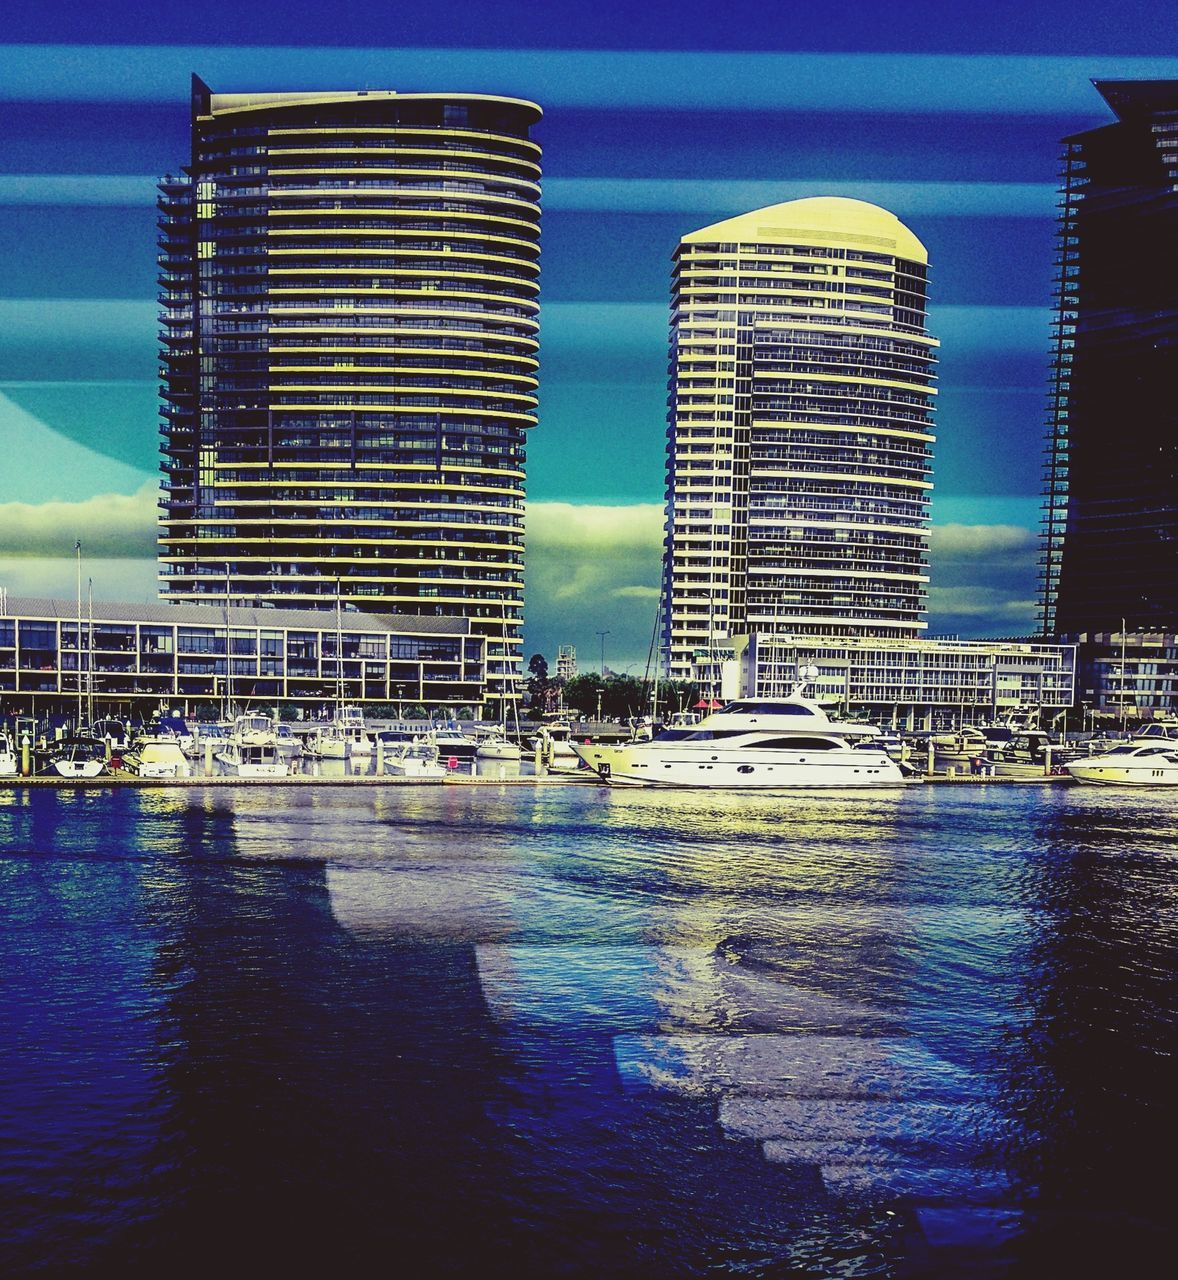 water, architecture, building exterior, built structure, waterfront, reflection, blue, city, sky, sea, illuminated, modern, transportation, building, nautical vessel, office building, river, skyscraper, no people, outdoors